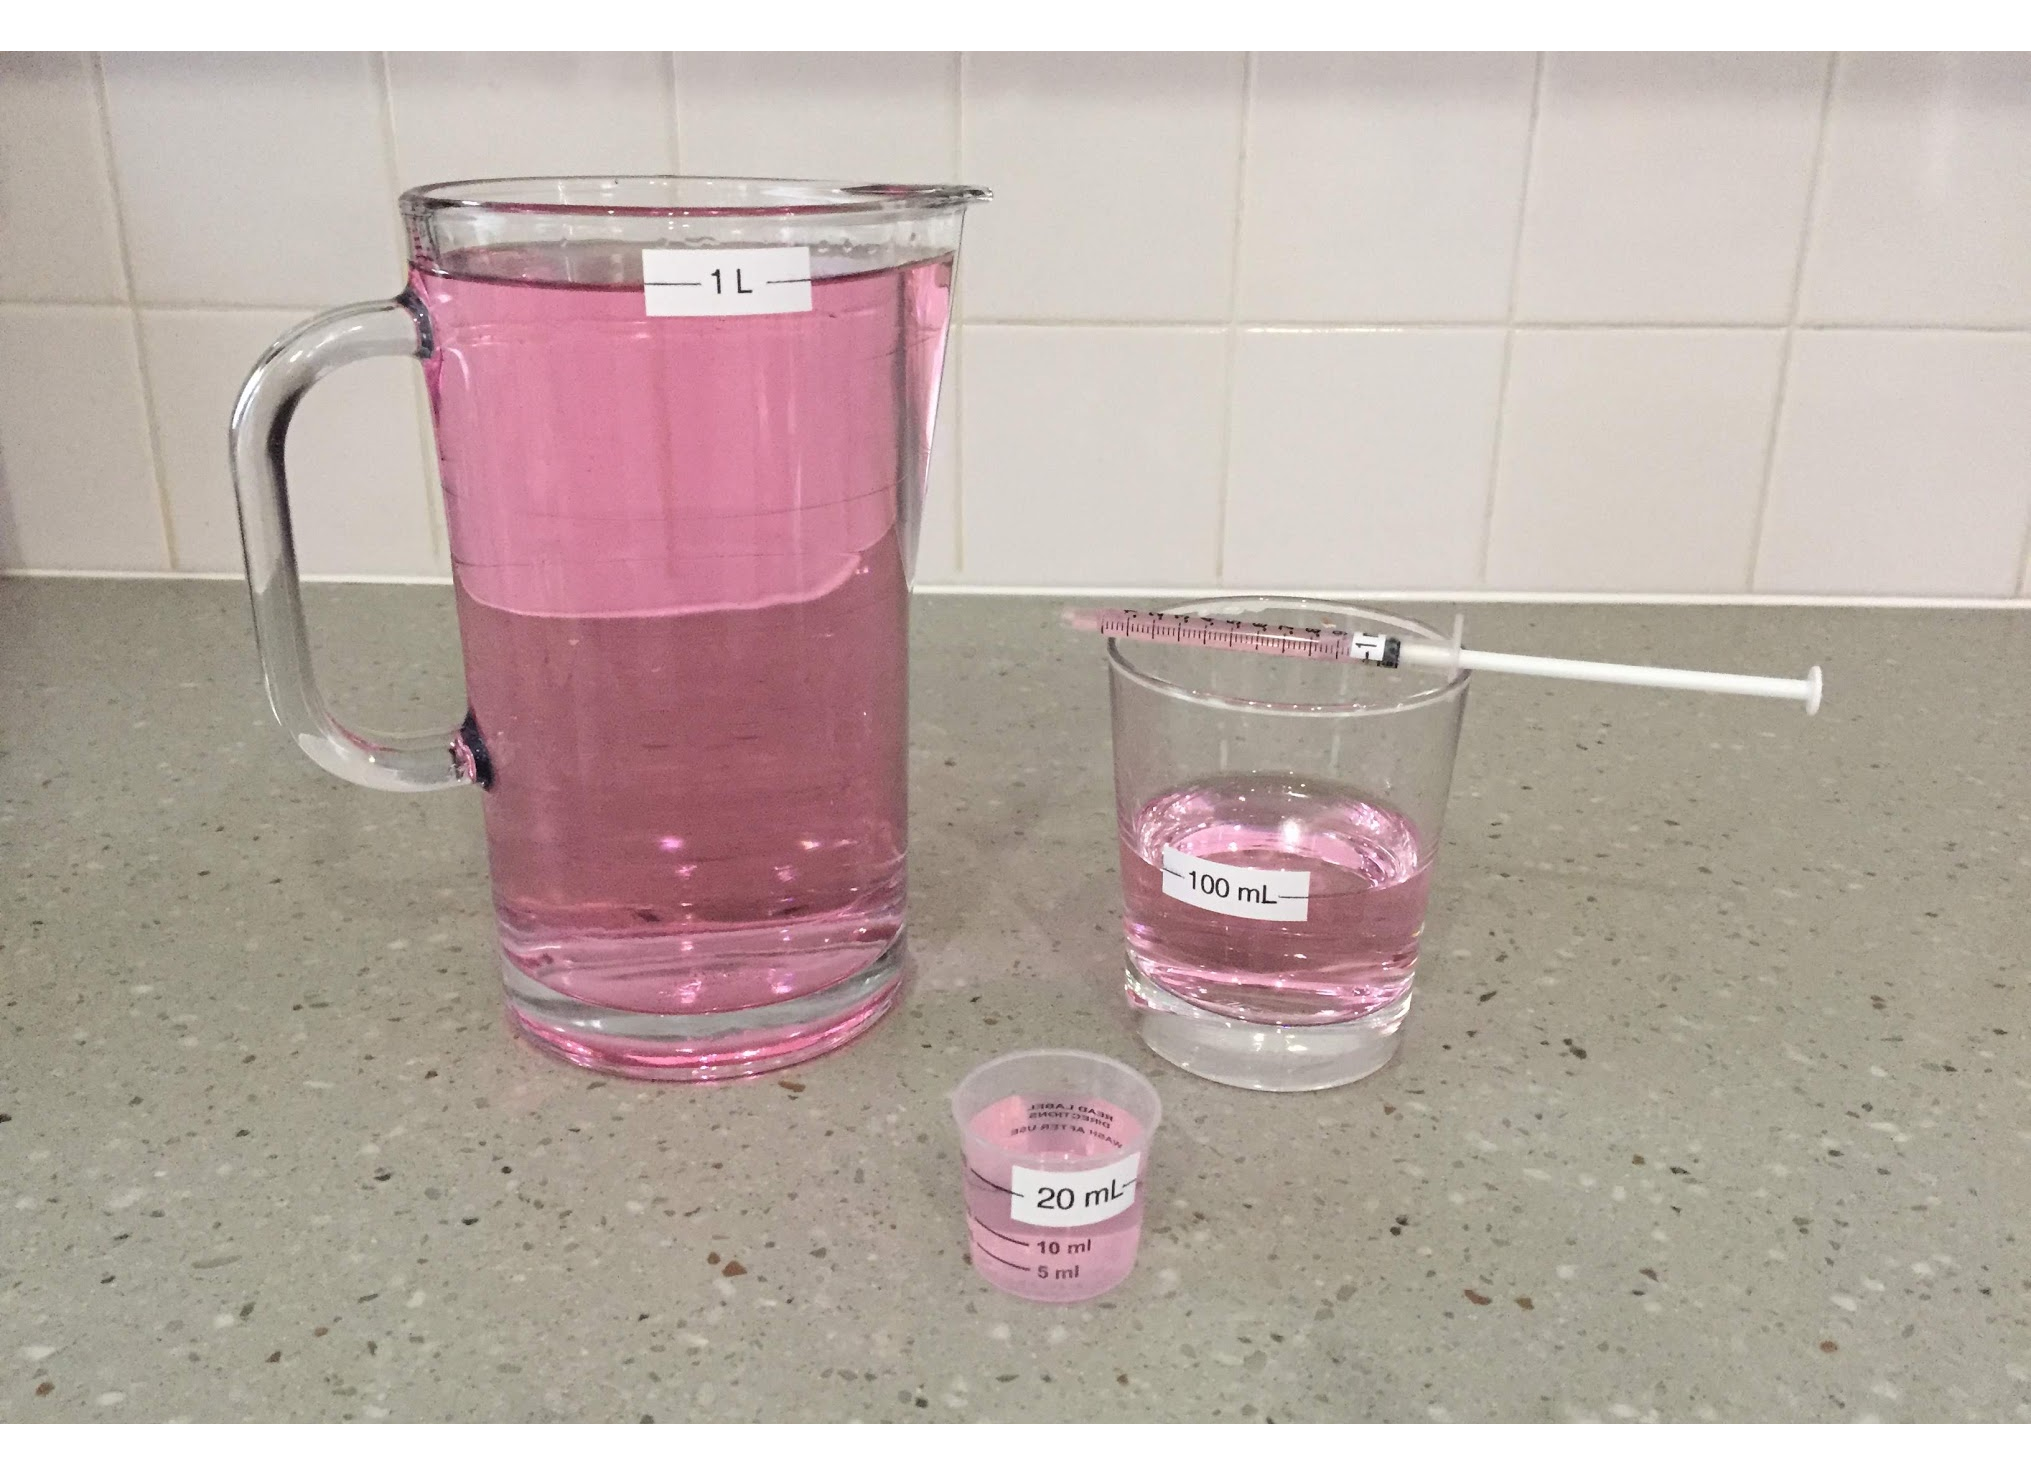 picture of pink liquid in 4 different size containers. Volumes of liquid, 1 liter, 100 milliliters, 20 milliliters, and some in a medicine dropper.